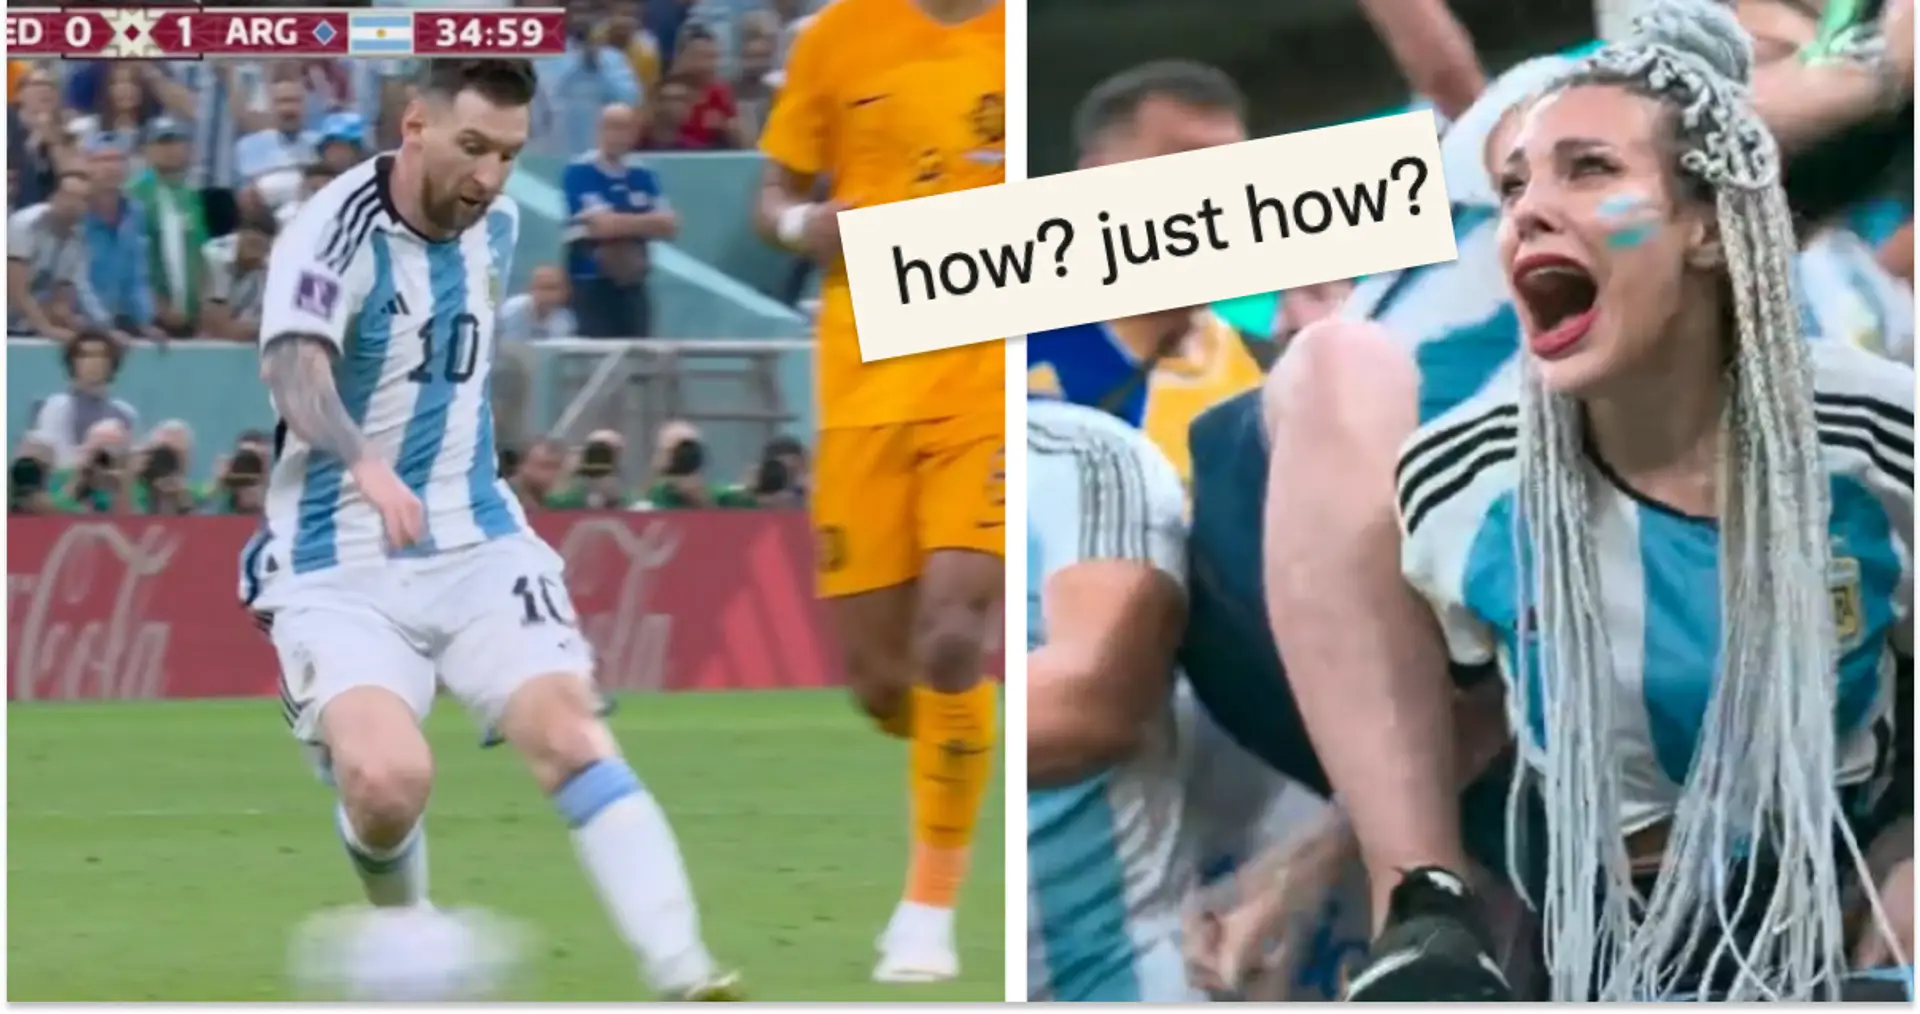 Messi makes typical only-Messi-can-do-it assist in World Cup quarterfinal - football fans react